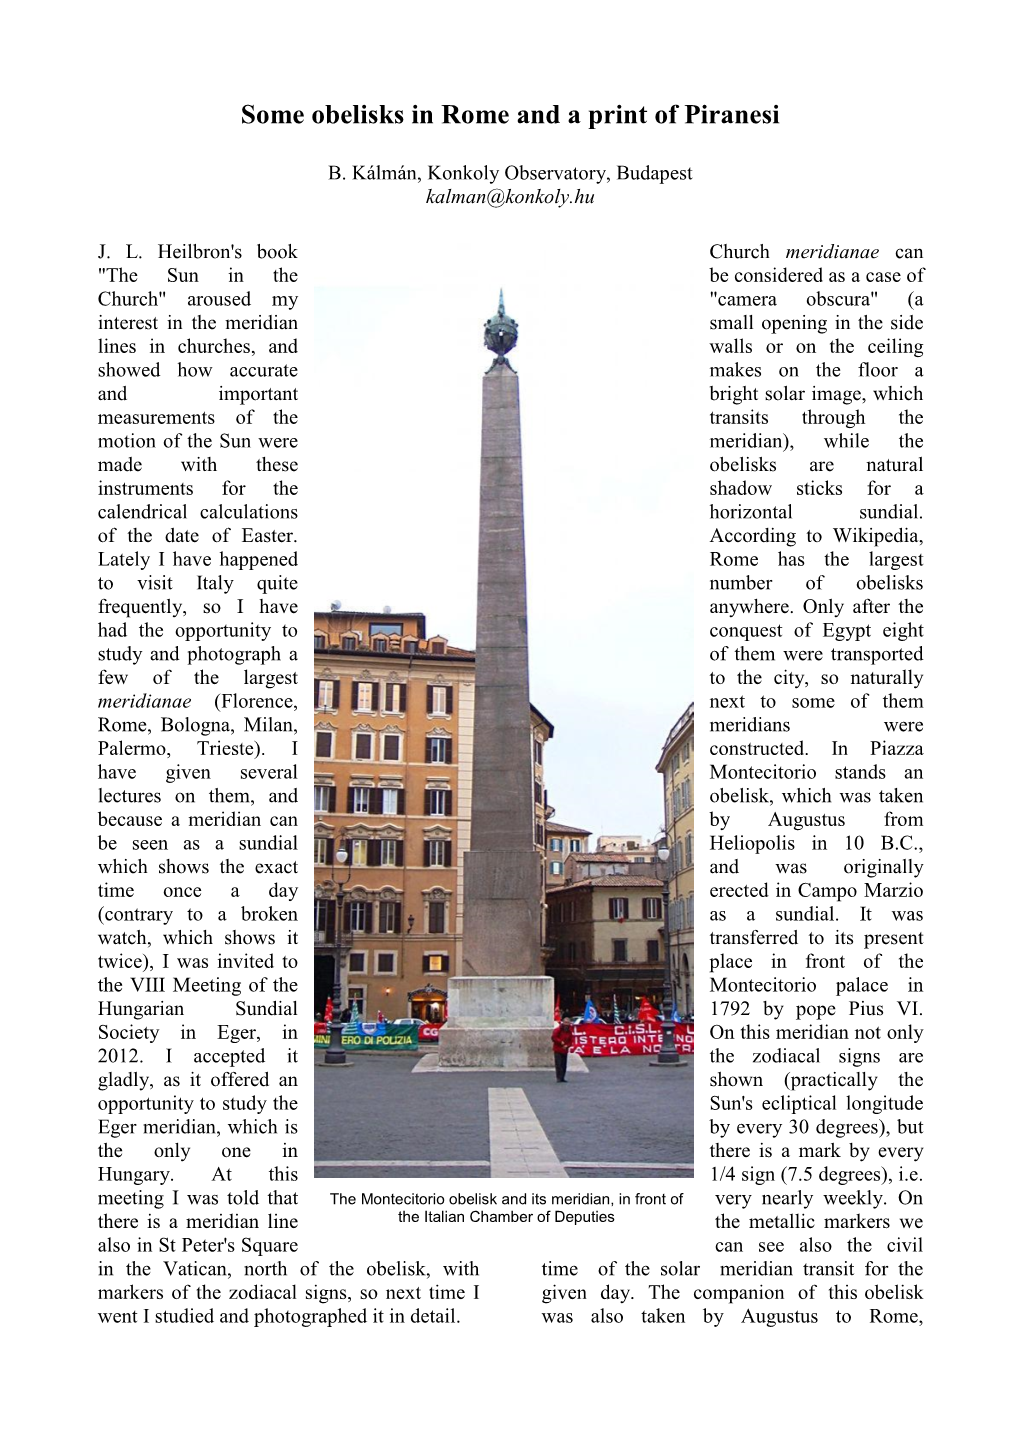 Some Obelisks in Rome and a Print of Piranesi